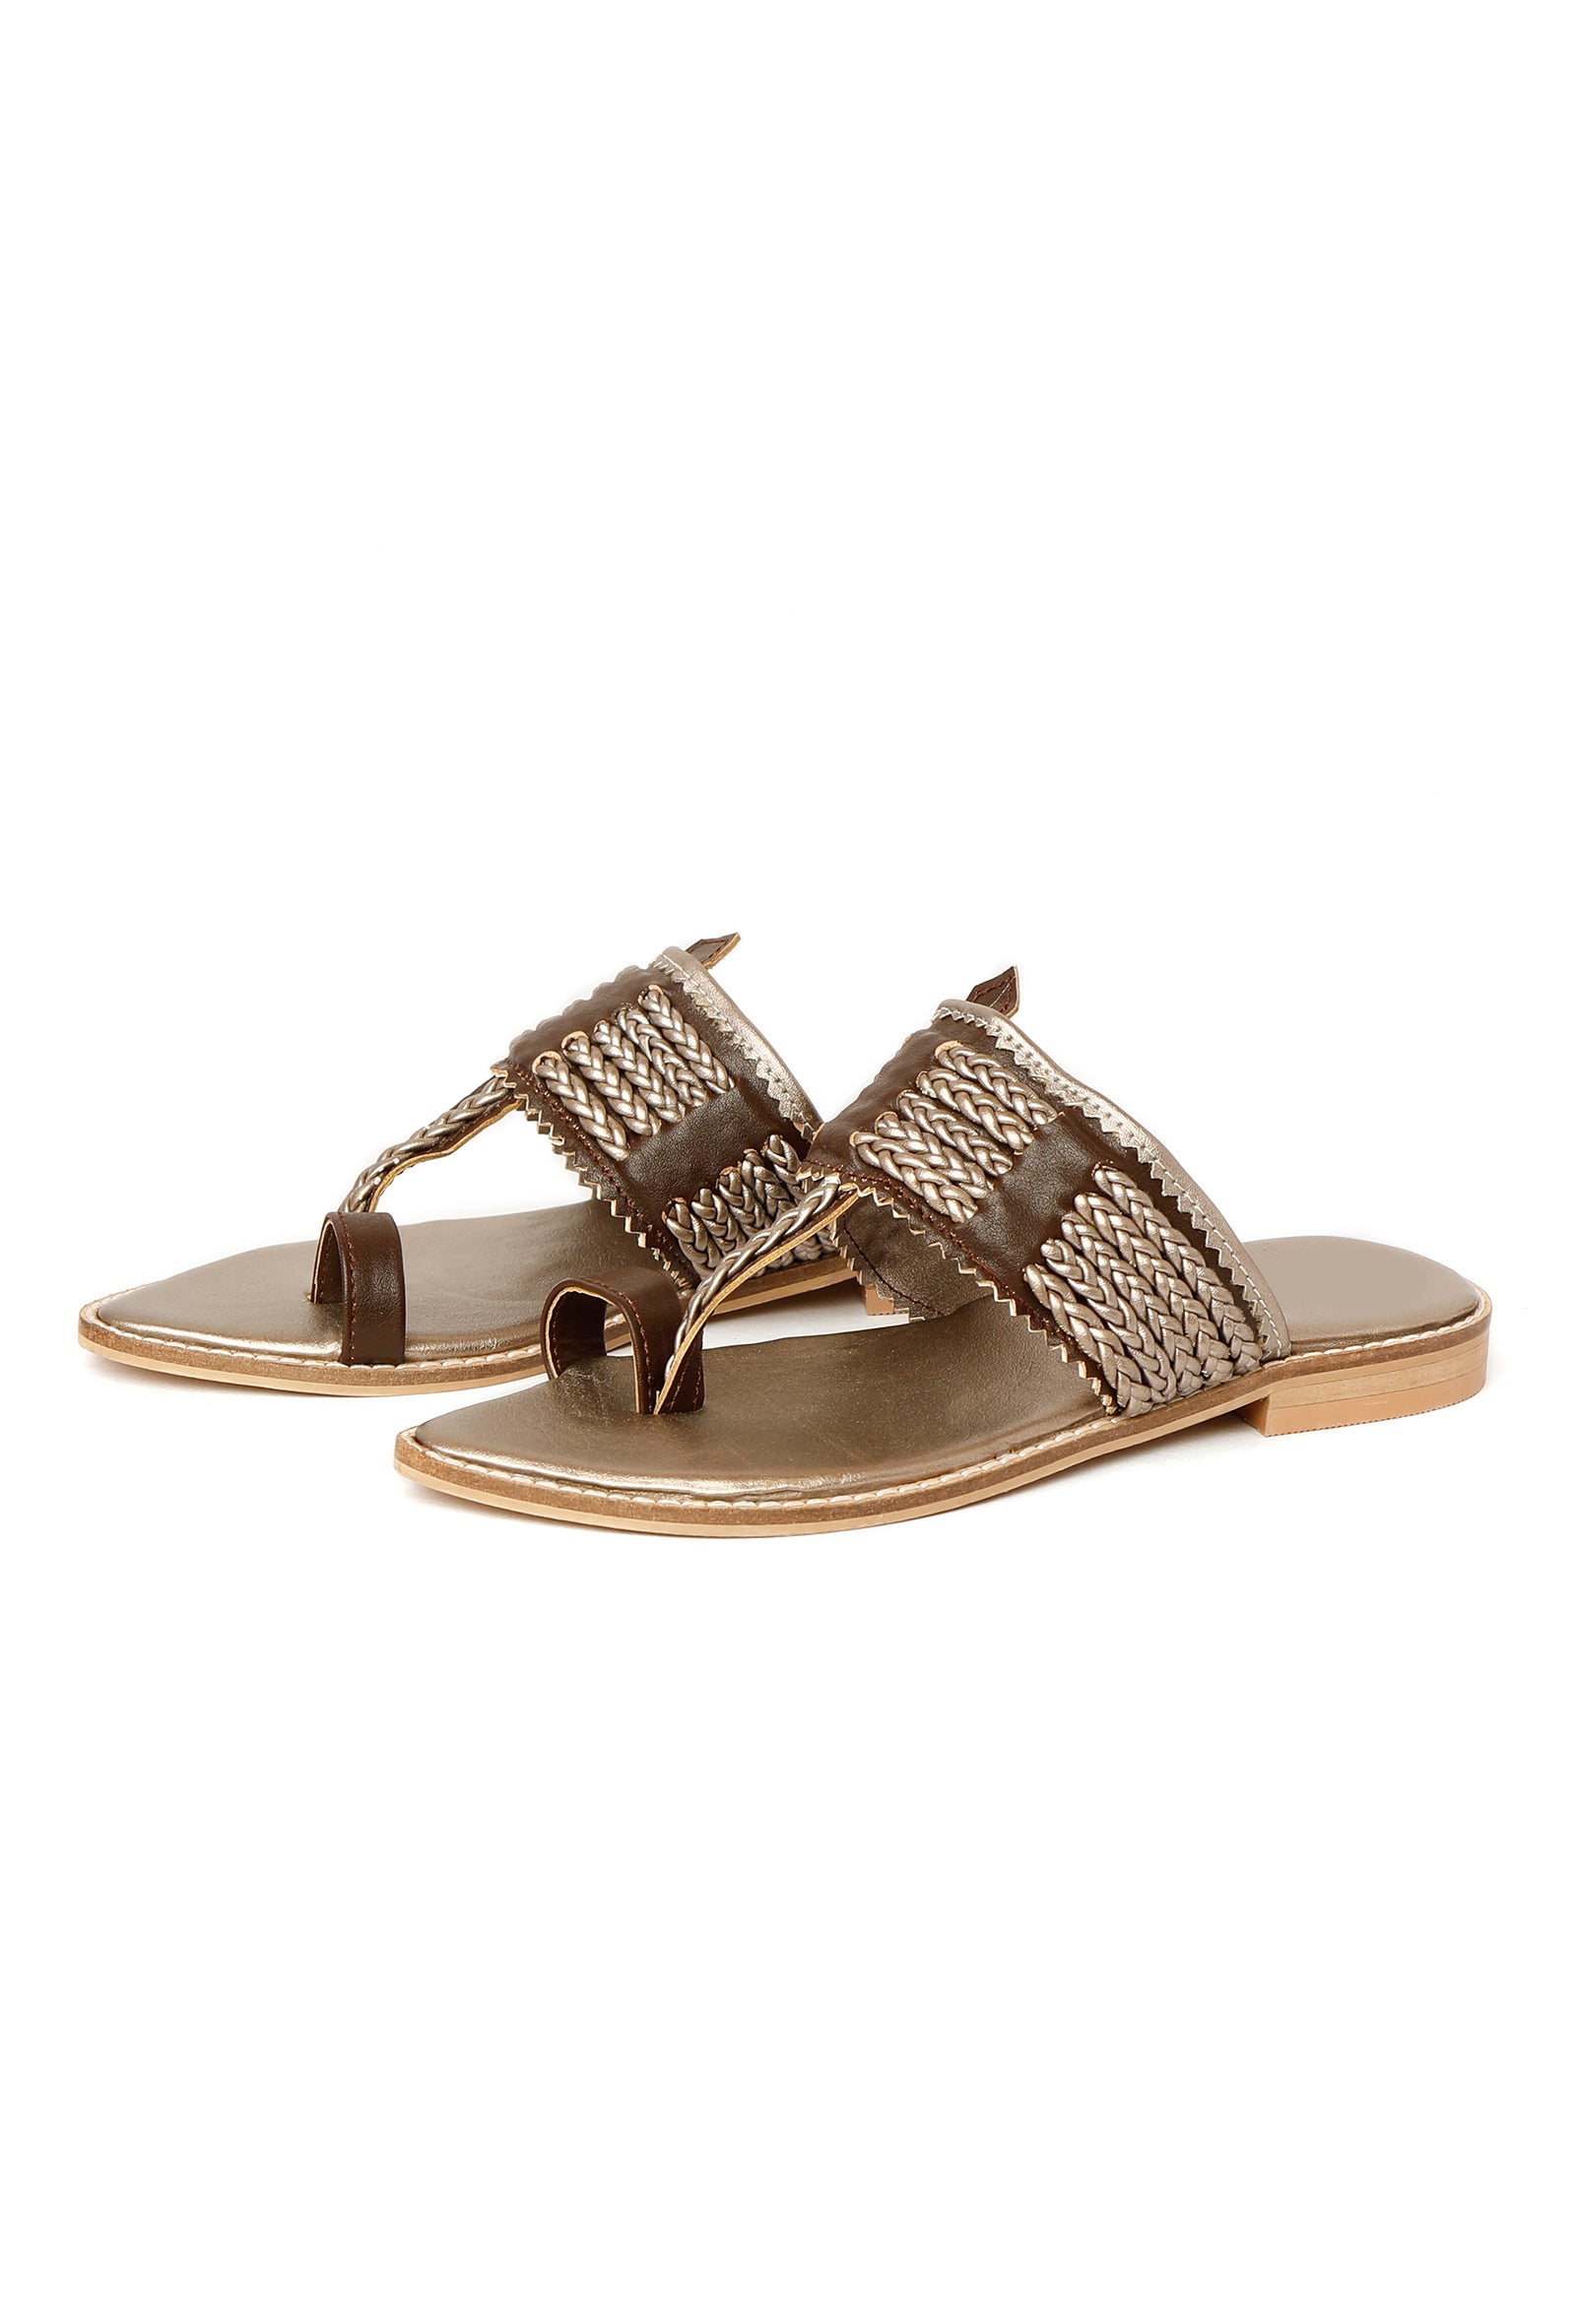 Brown & Silver Cruelty Free Leather Sandals